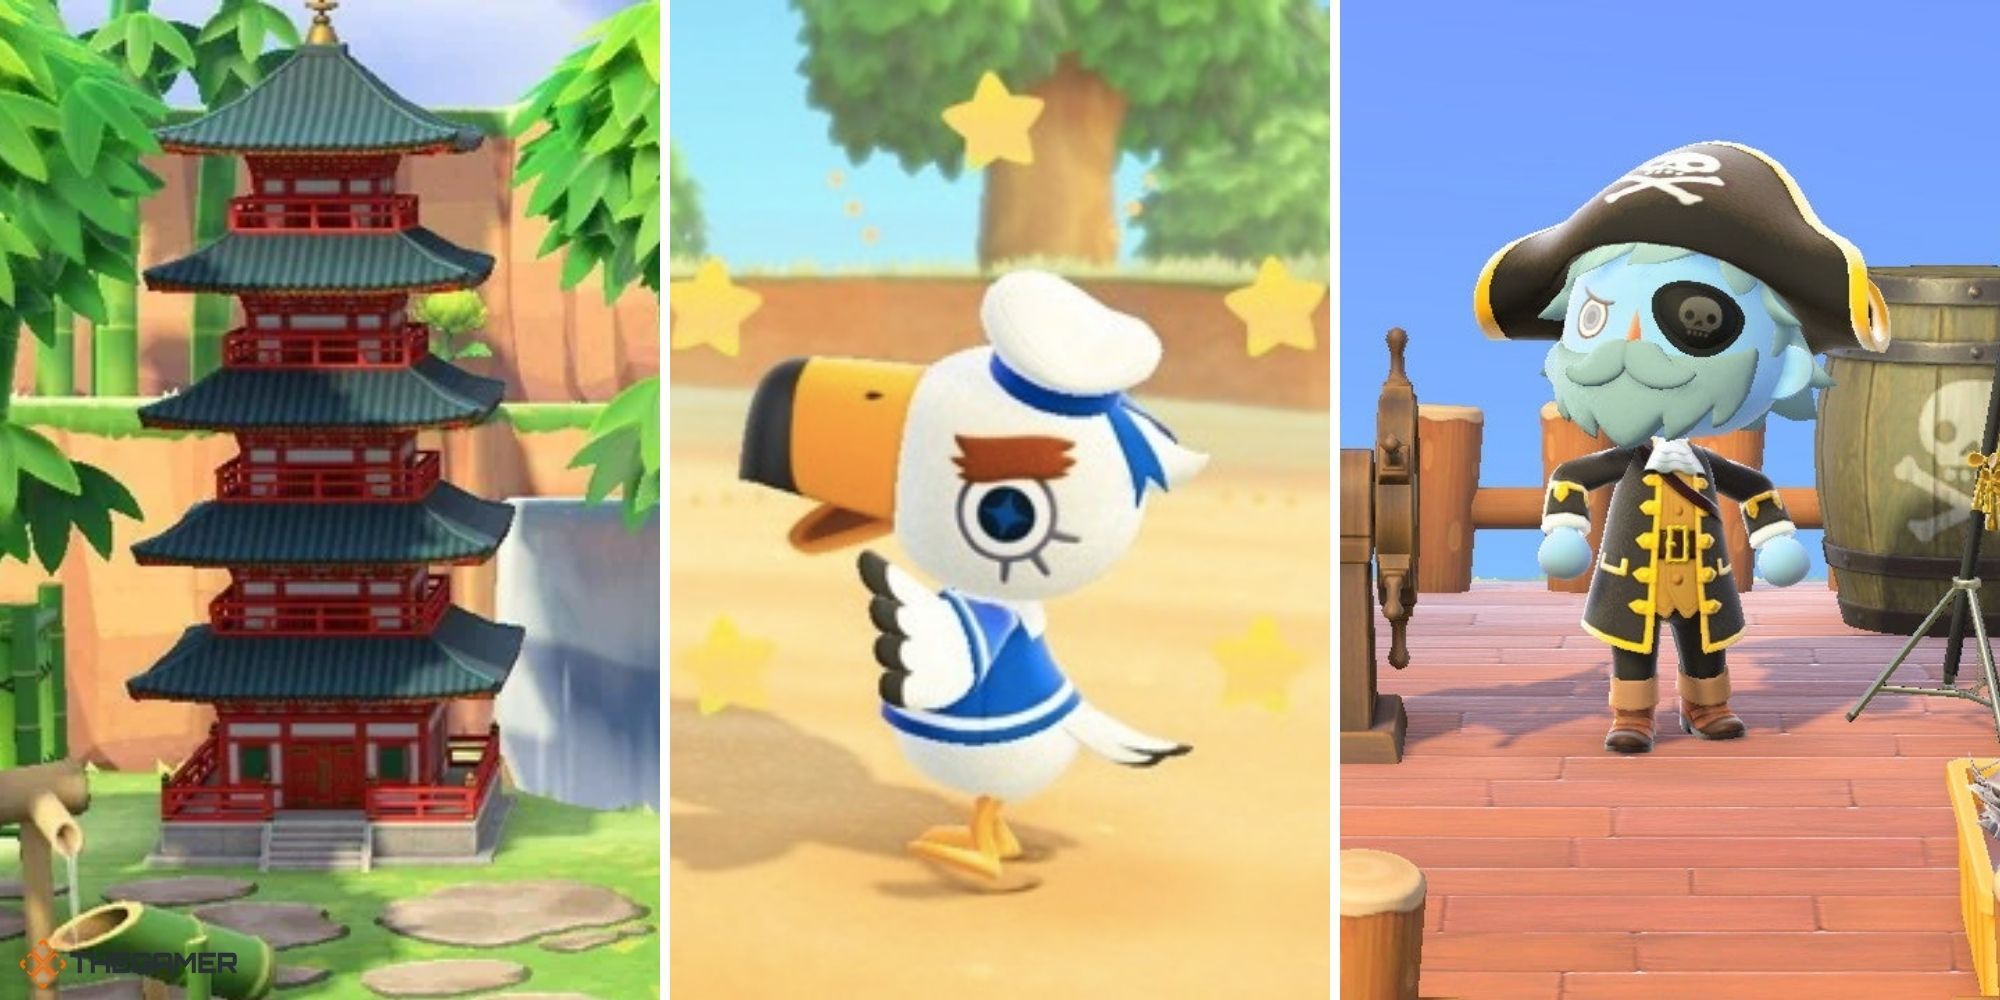 Animal Crossing New Horizons - Gulliver in centre, pirate on right, Pagoda on left